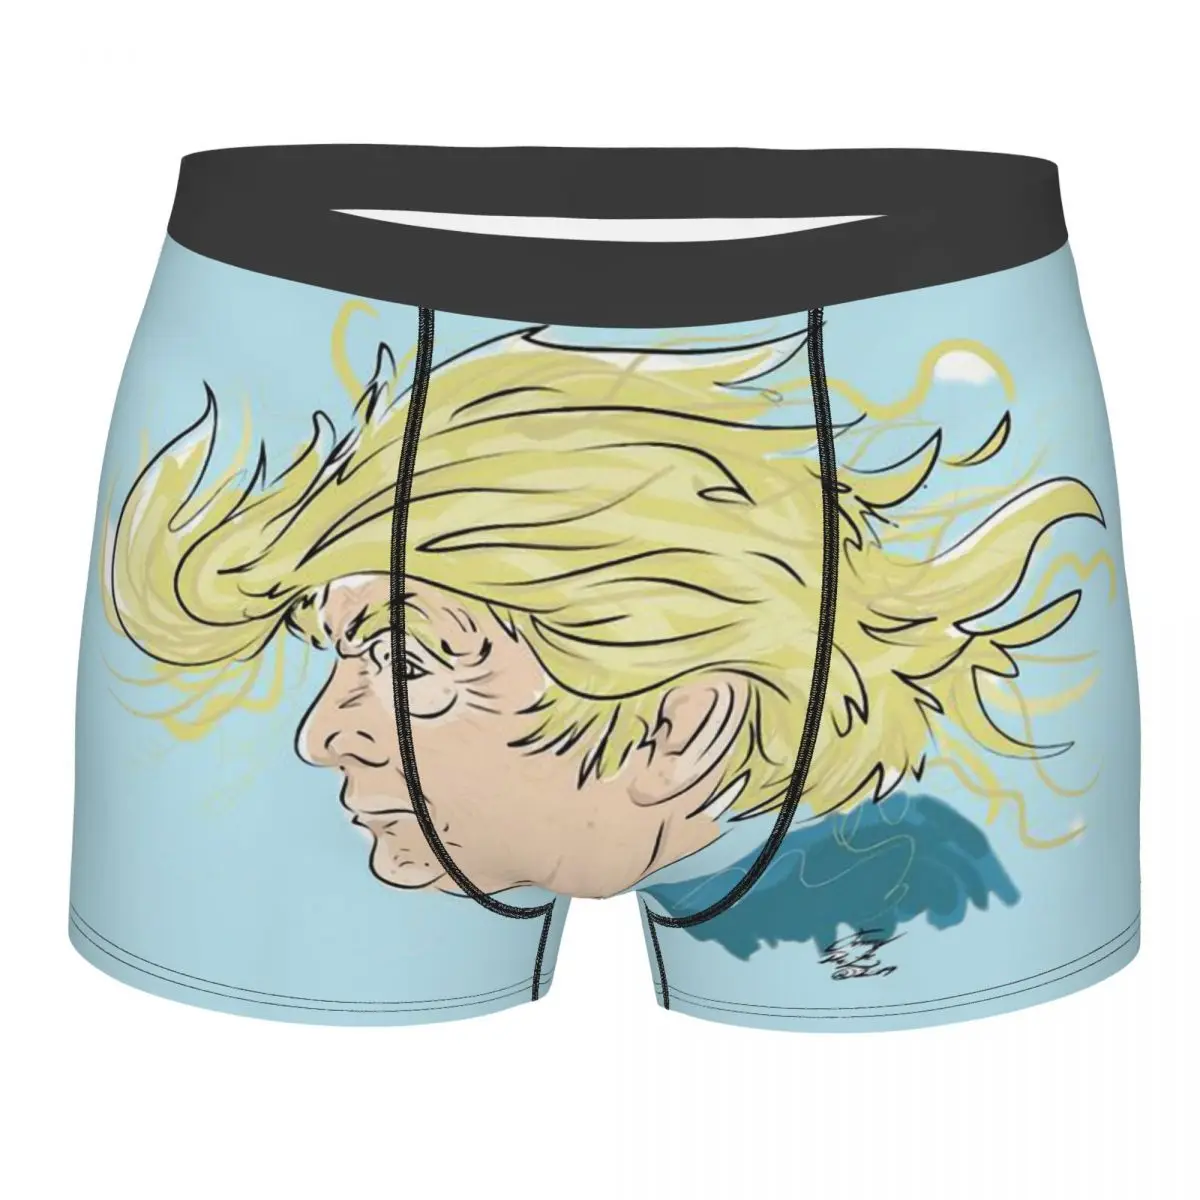 Donald Trump Cartoon Men Underwear, Highly Breathable printing Top Quality Gift Idea the making of donald trump м johnston